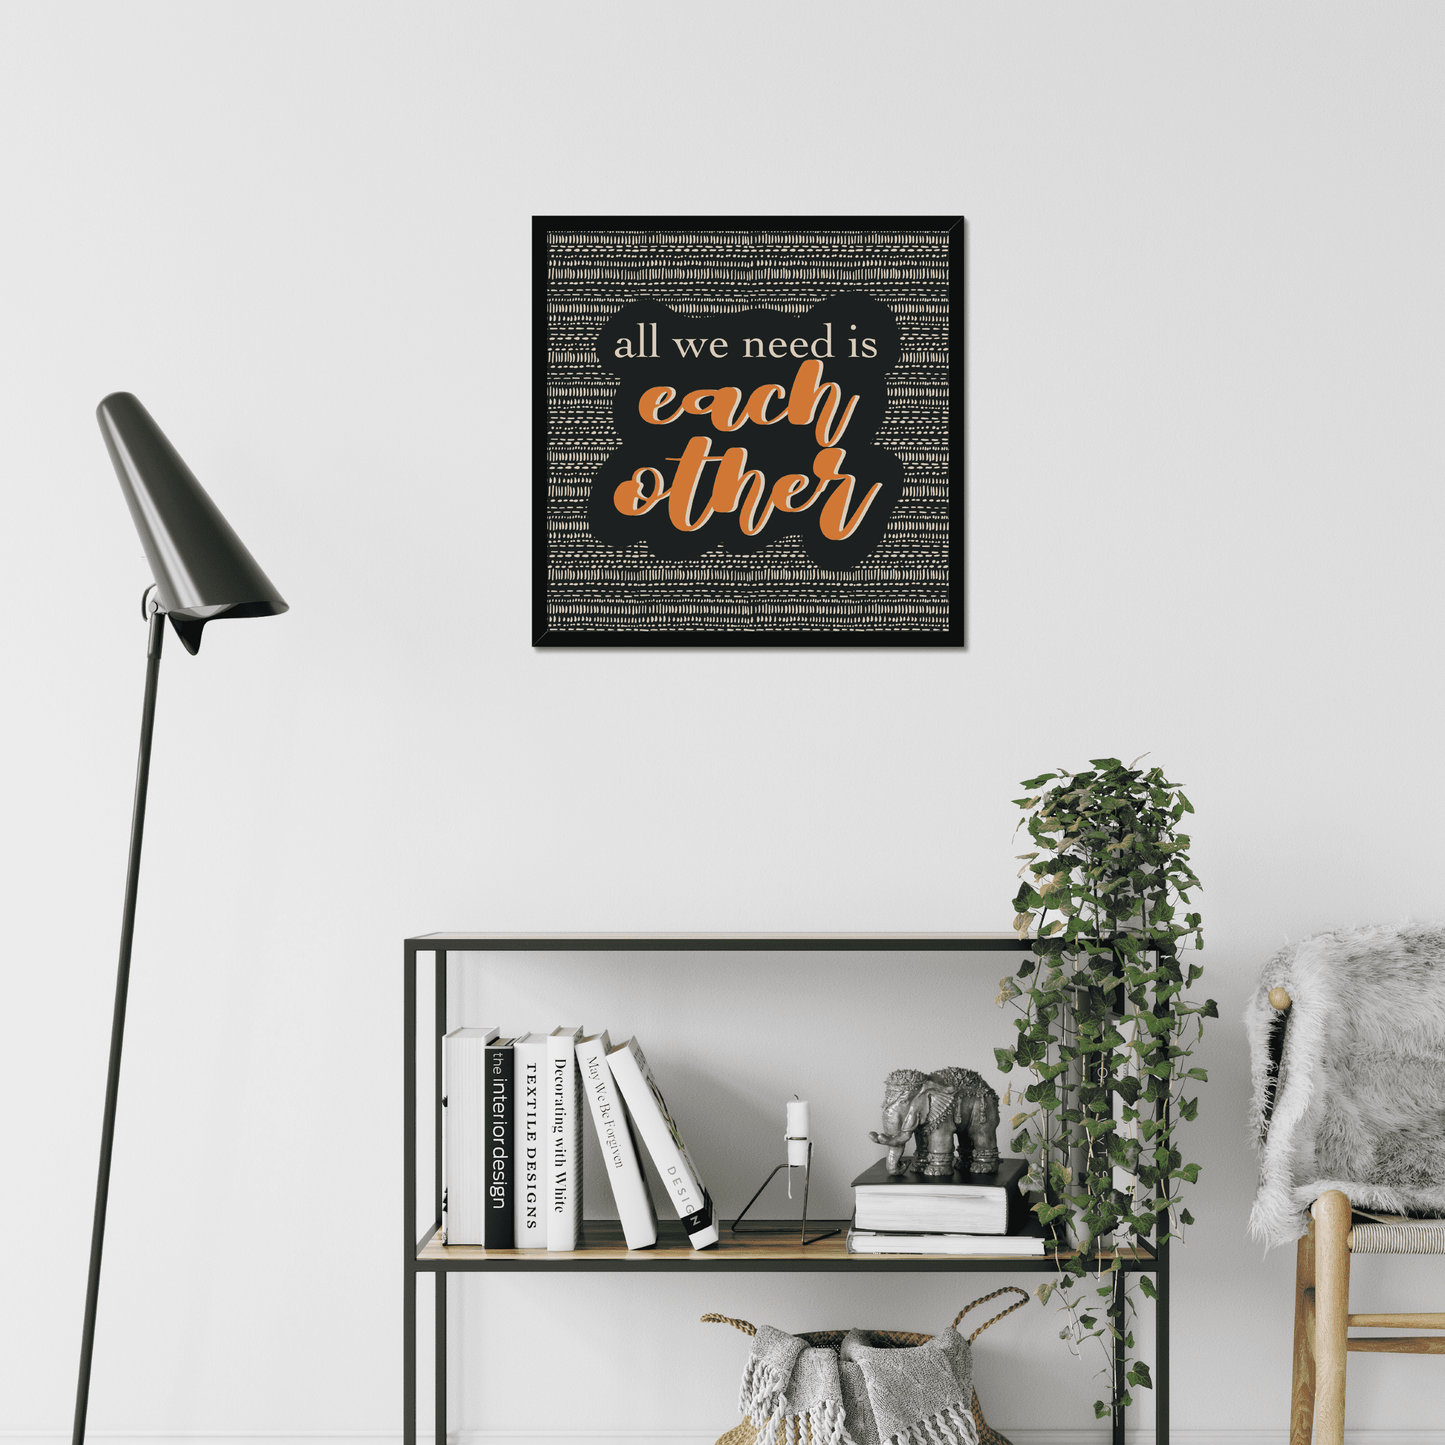 A boho wall art print that brings warmth and happiness to your home.